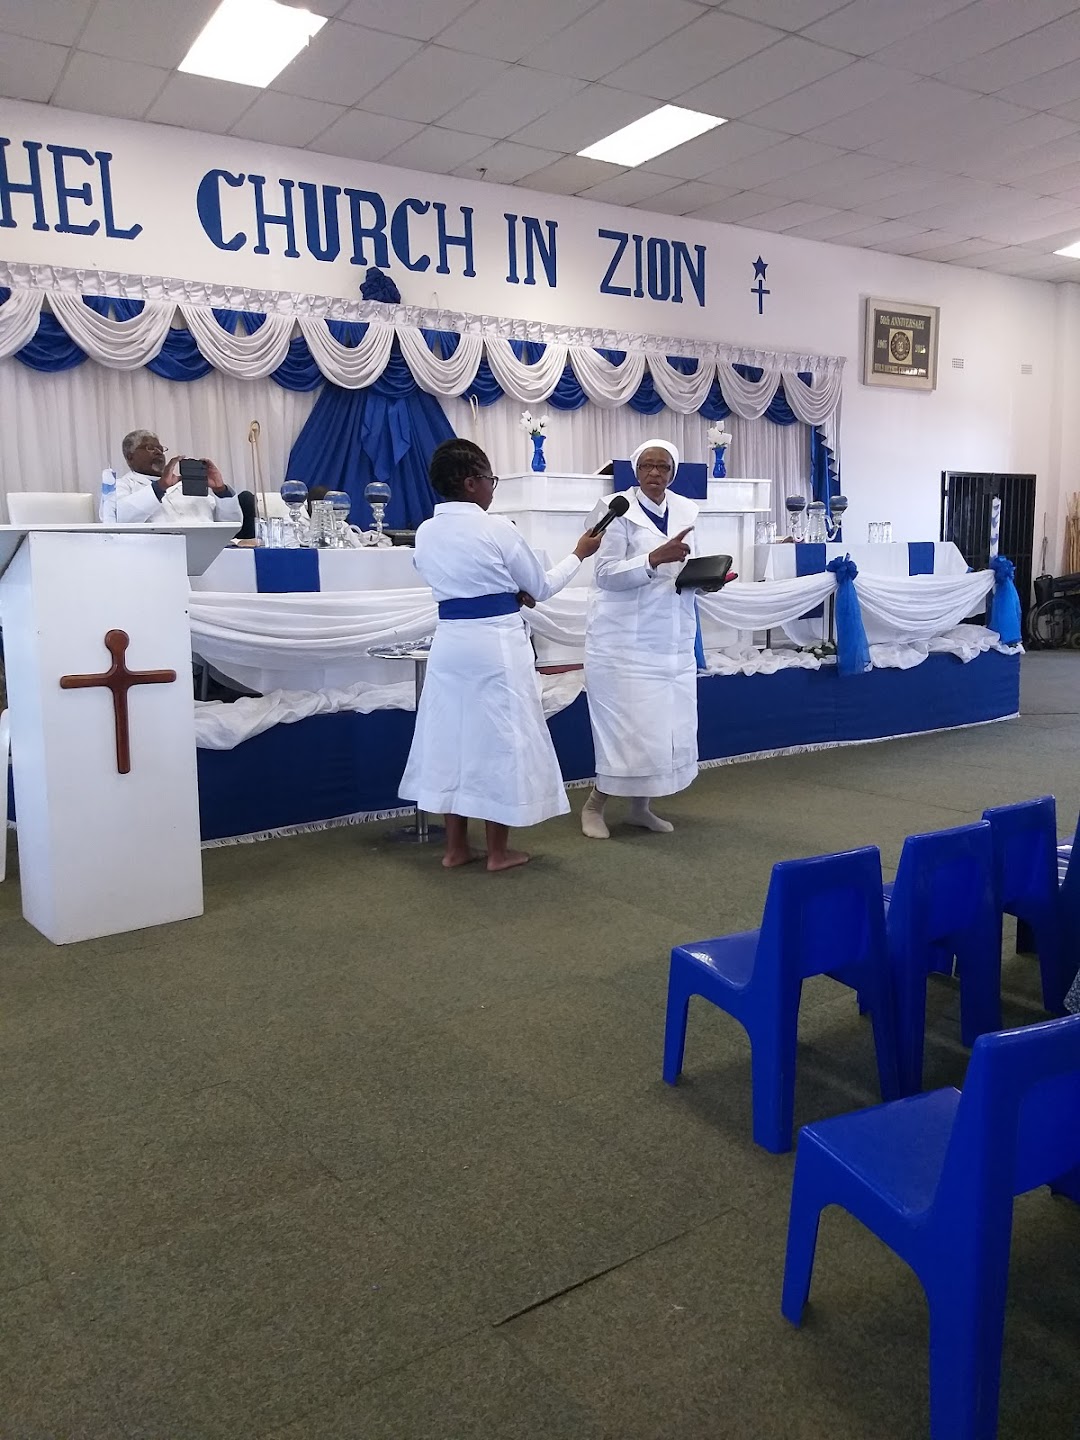 Holy Bethel Church In Zion